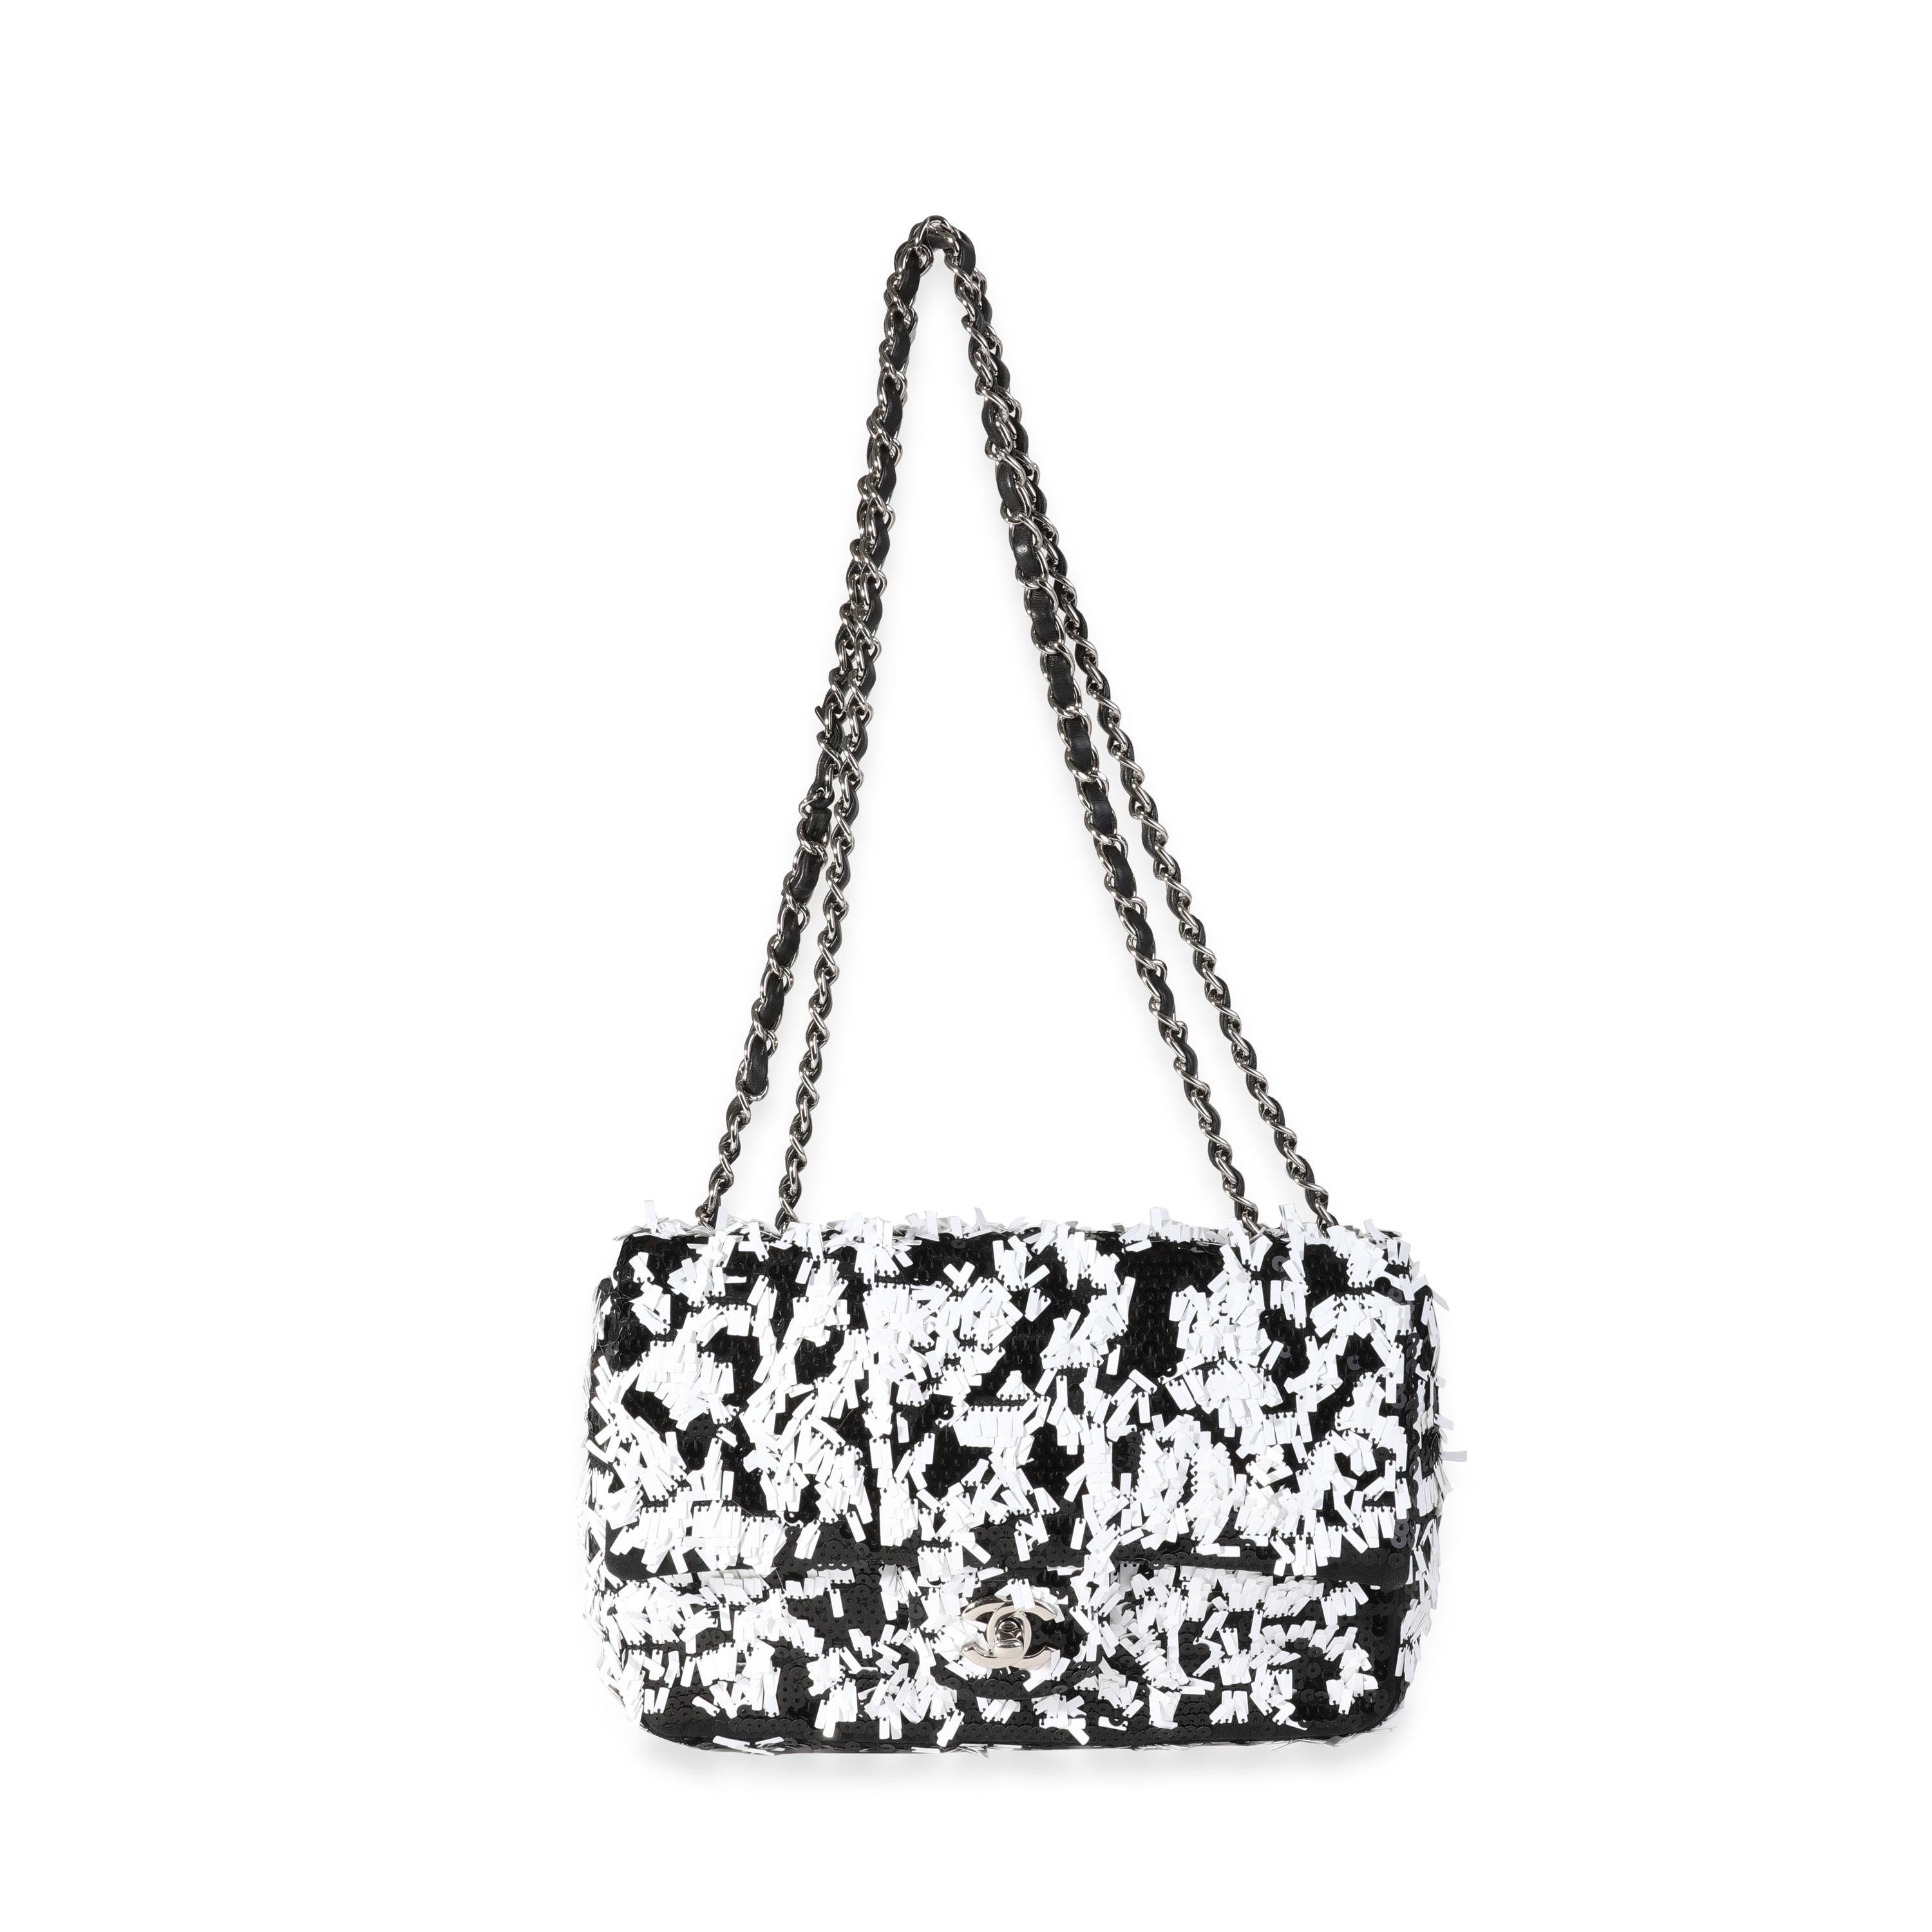 Listing Title: Chanel Black & White Sequin Medium Single Flap Bag
SKU: 118012
Condition: Pre-owned (3000)
Handbag Condition: Very Good
Condition Comments: Very Good Condition. Scratching to hardware. Light scuffing to interior leather.
Brand: